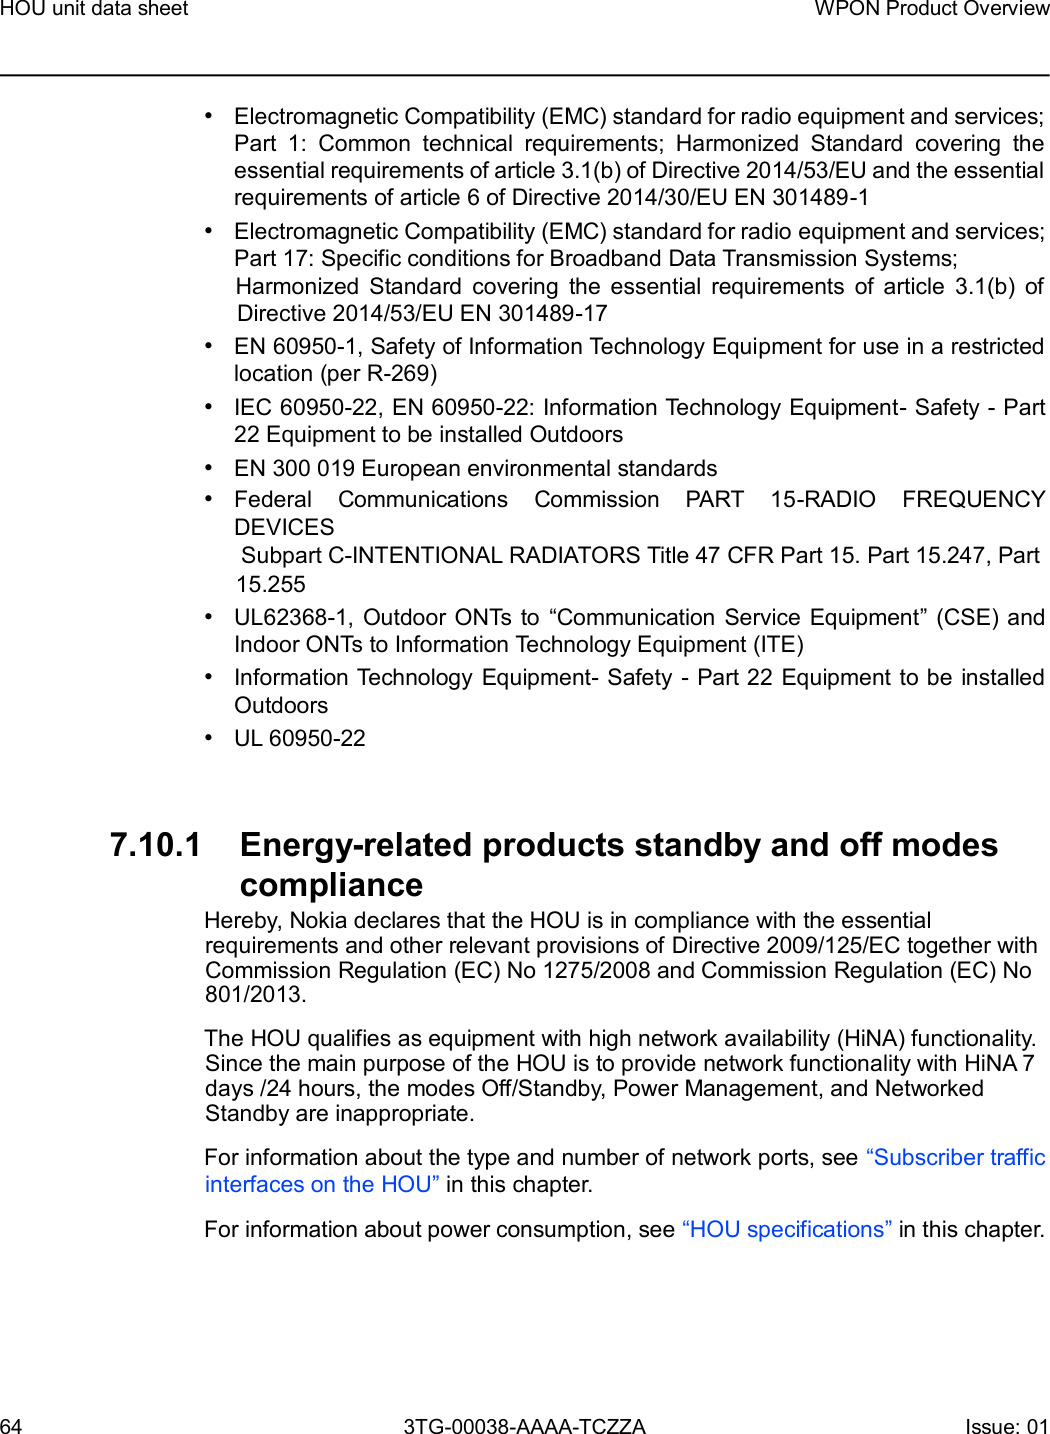 Page 64 of Nokia Bell 7577WPONAPED WPON User Manual WPON Product Overview